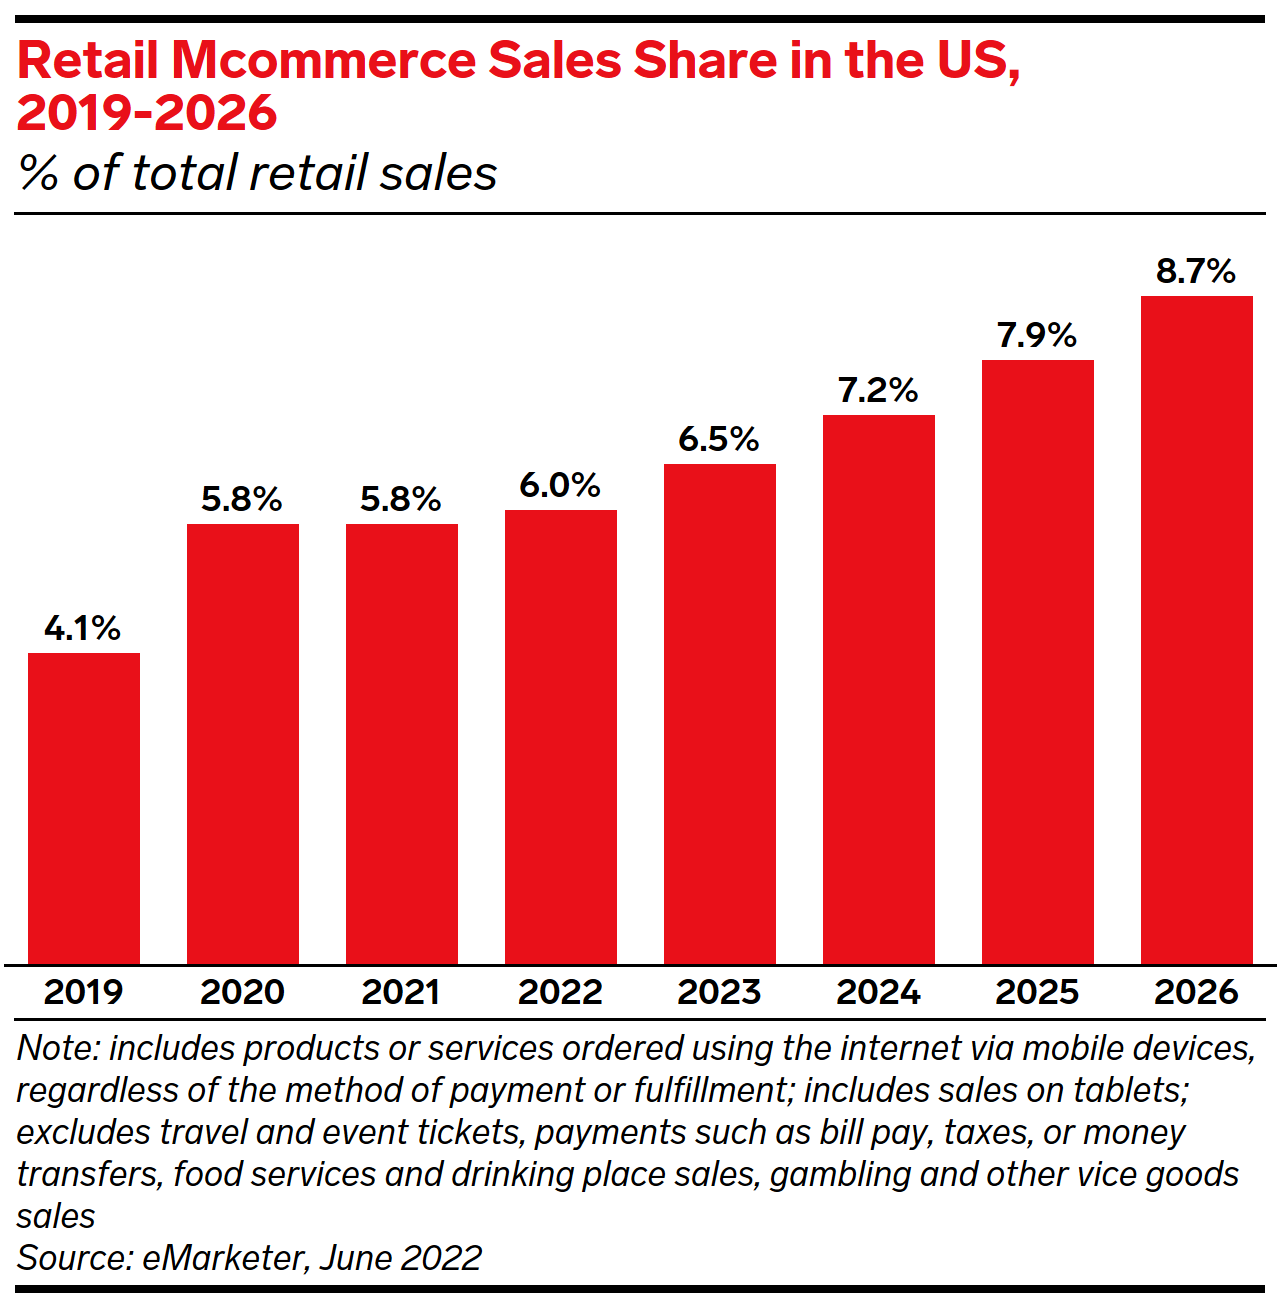 Retail mCommerce sales share in the US